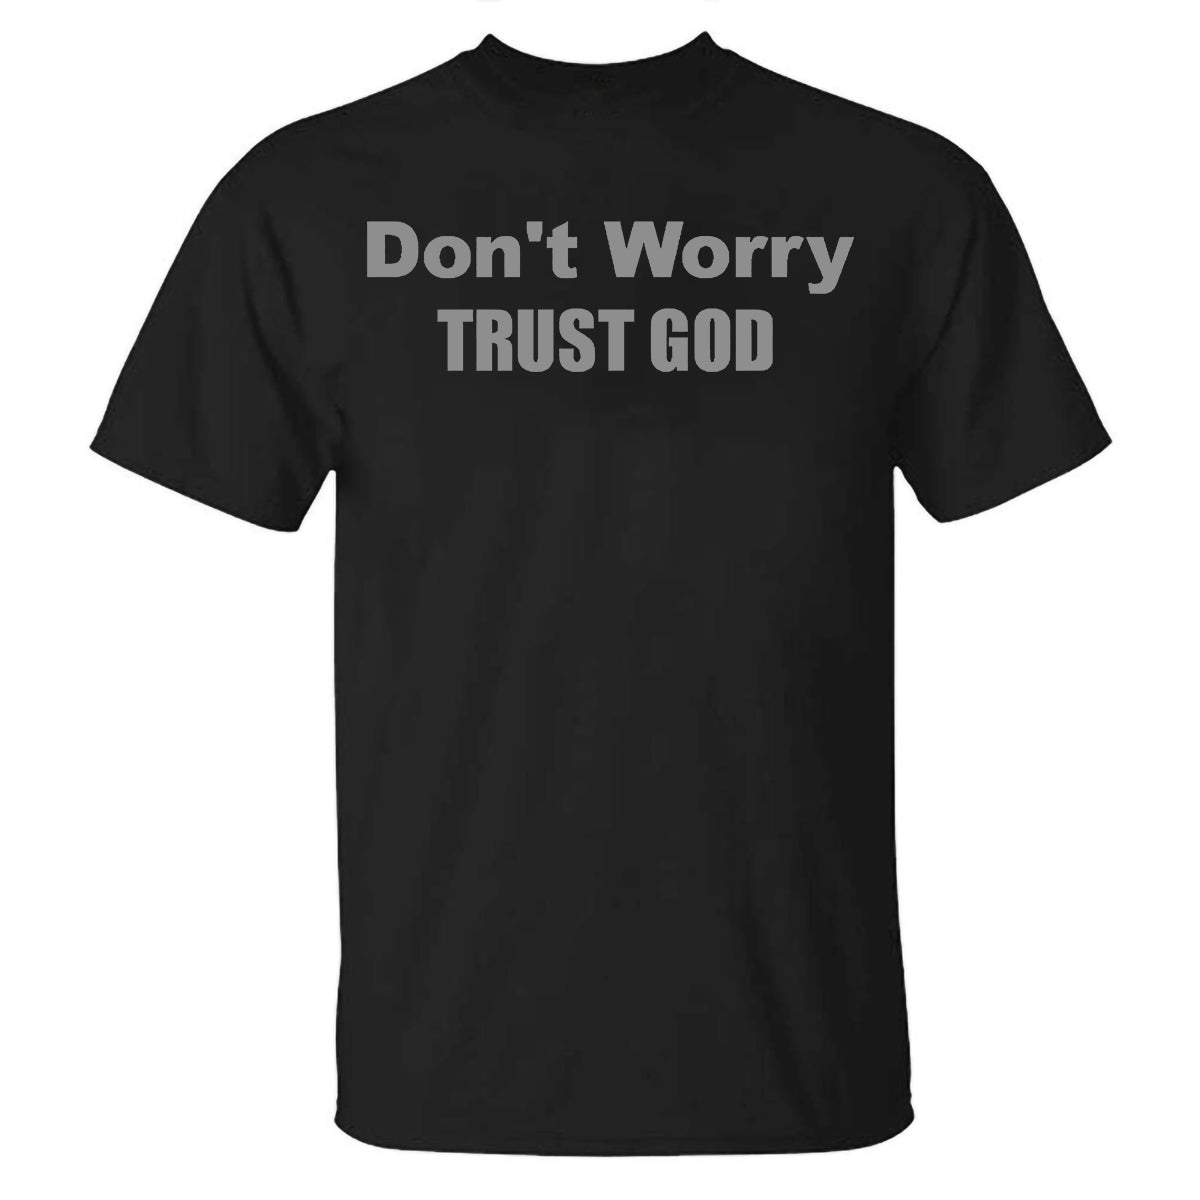 Don't Worry Trust God Printed Casual T-shirt